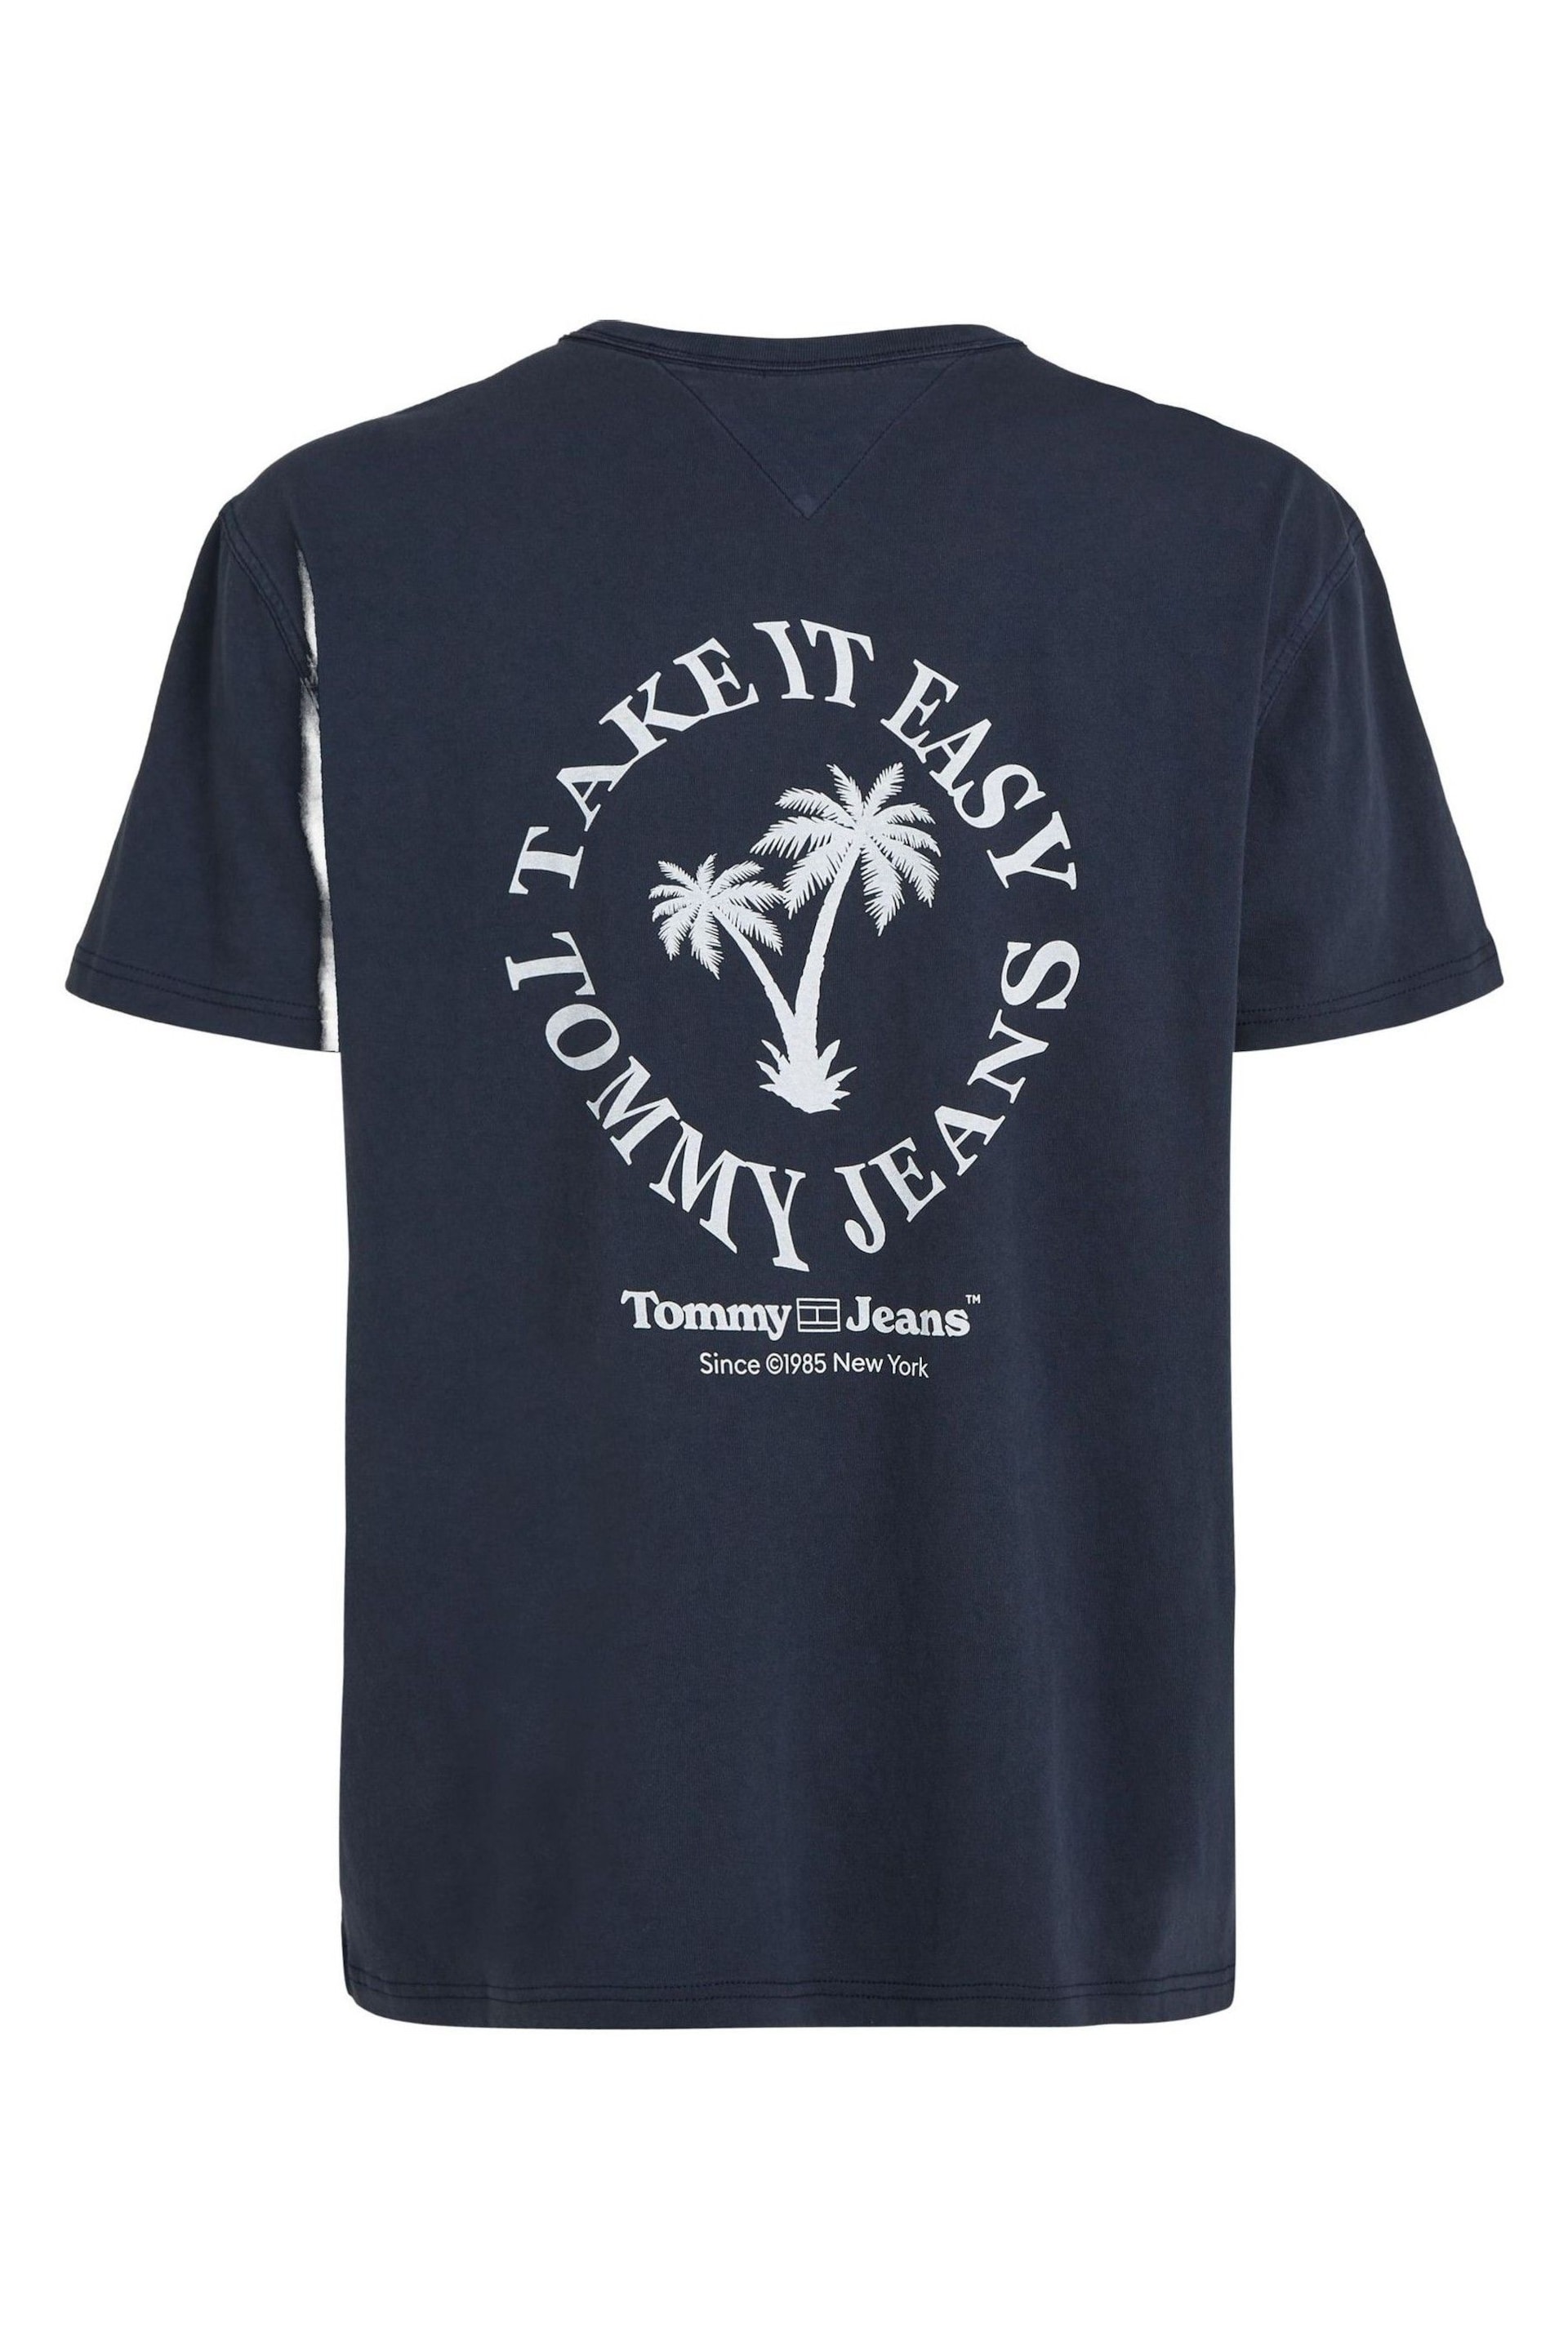 Tommy Jeans Blue Novelty Graphic T-Shirt - Image 5 of 6